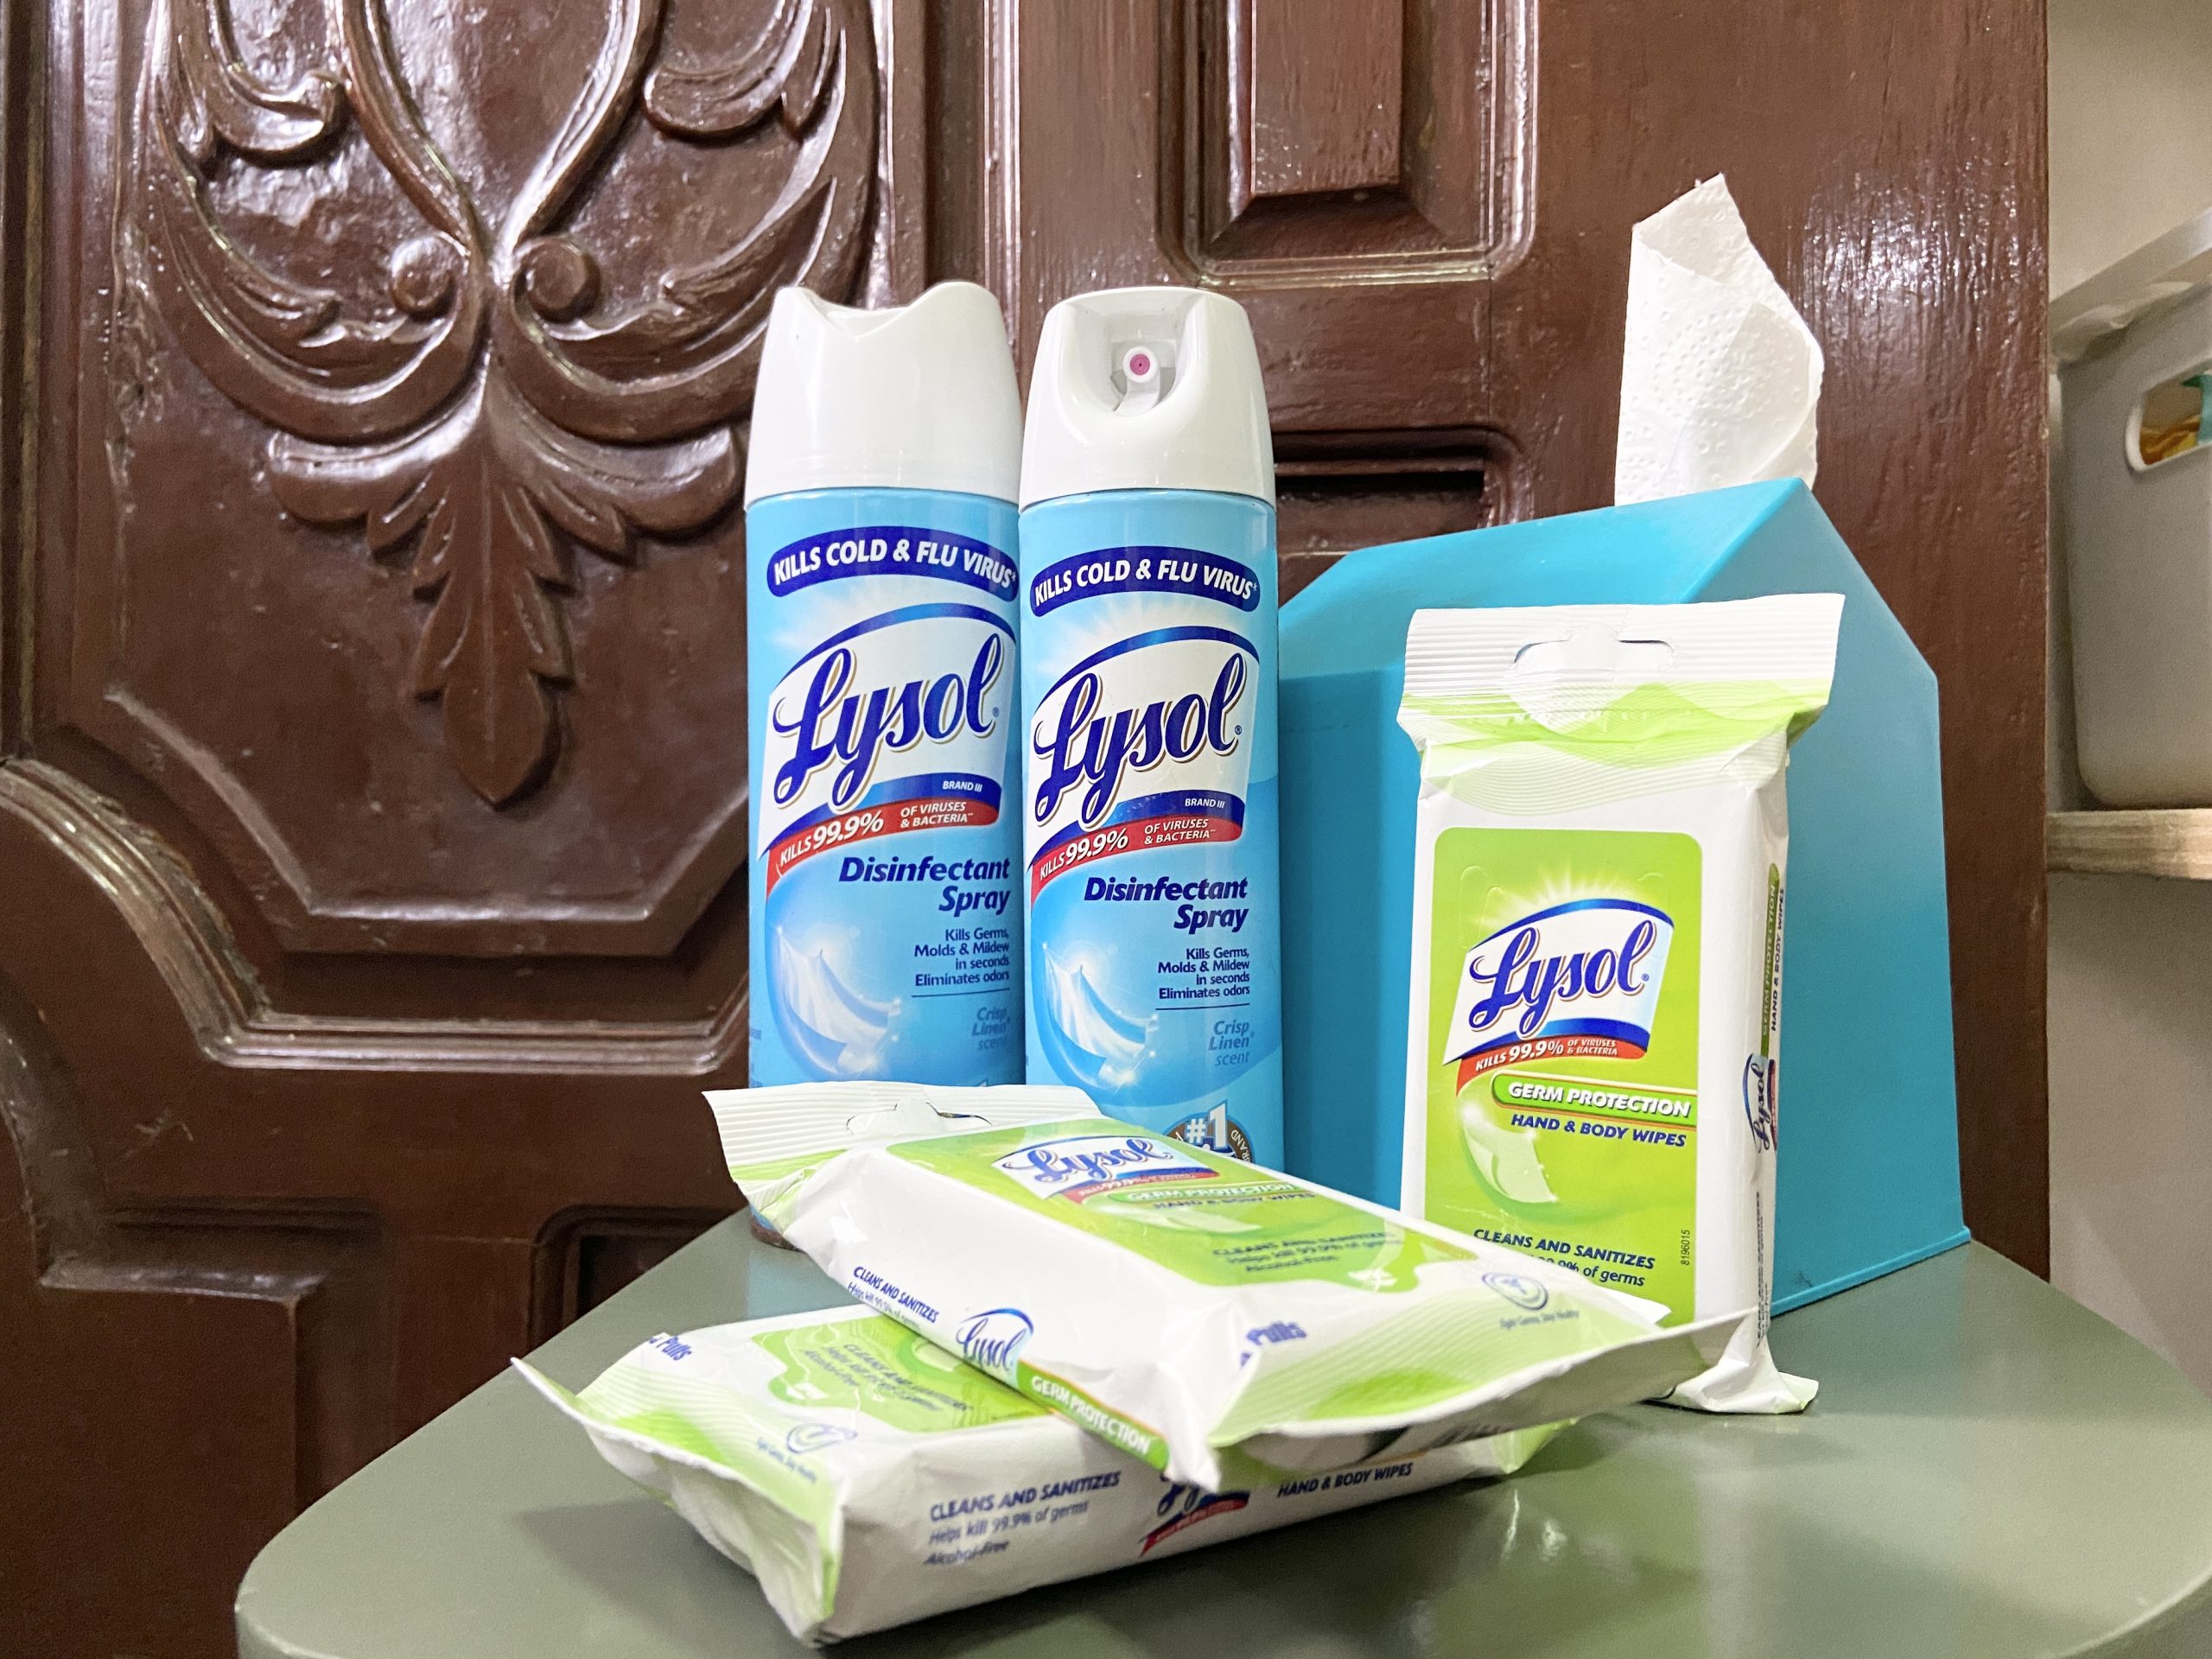 Shopee 3.15 Consumer Day Deals: Sharing Our Daily Cleaning Routine with Lysol